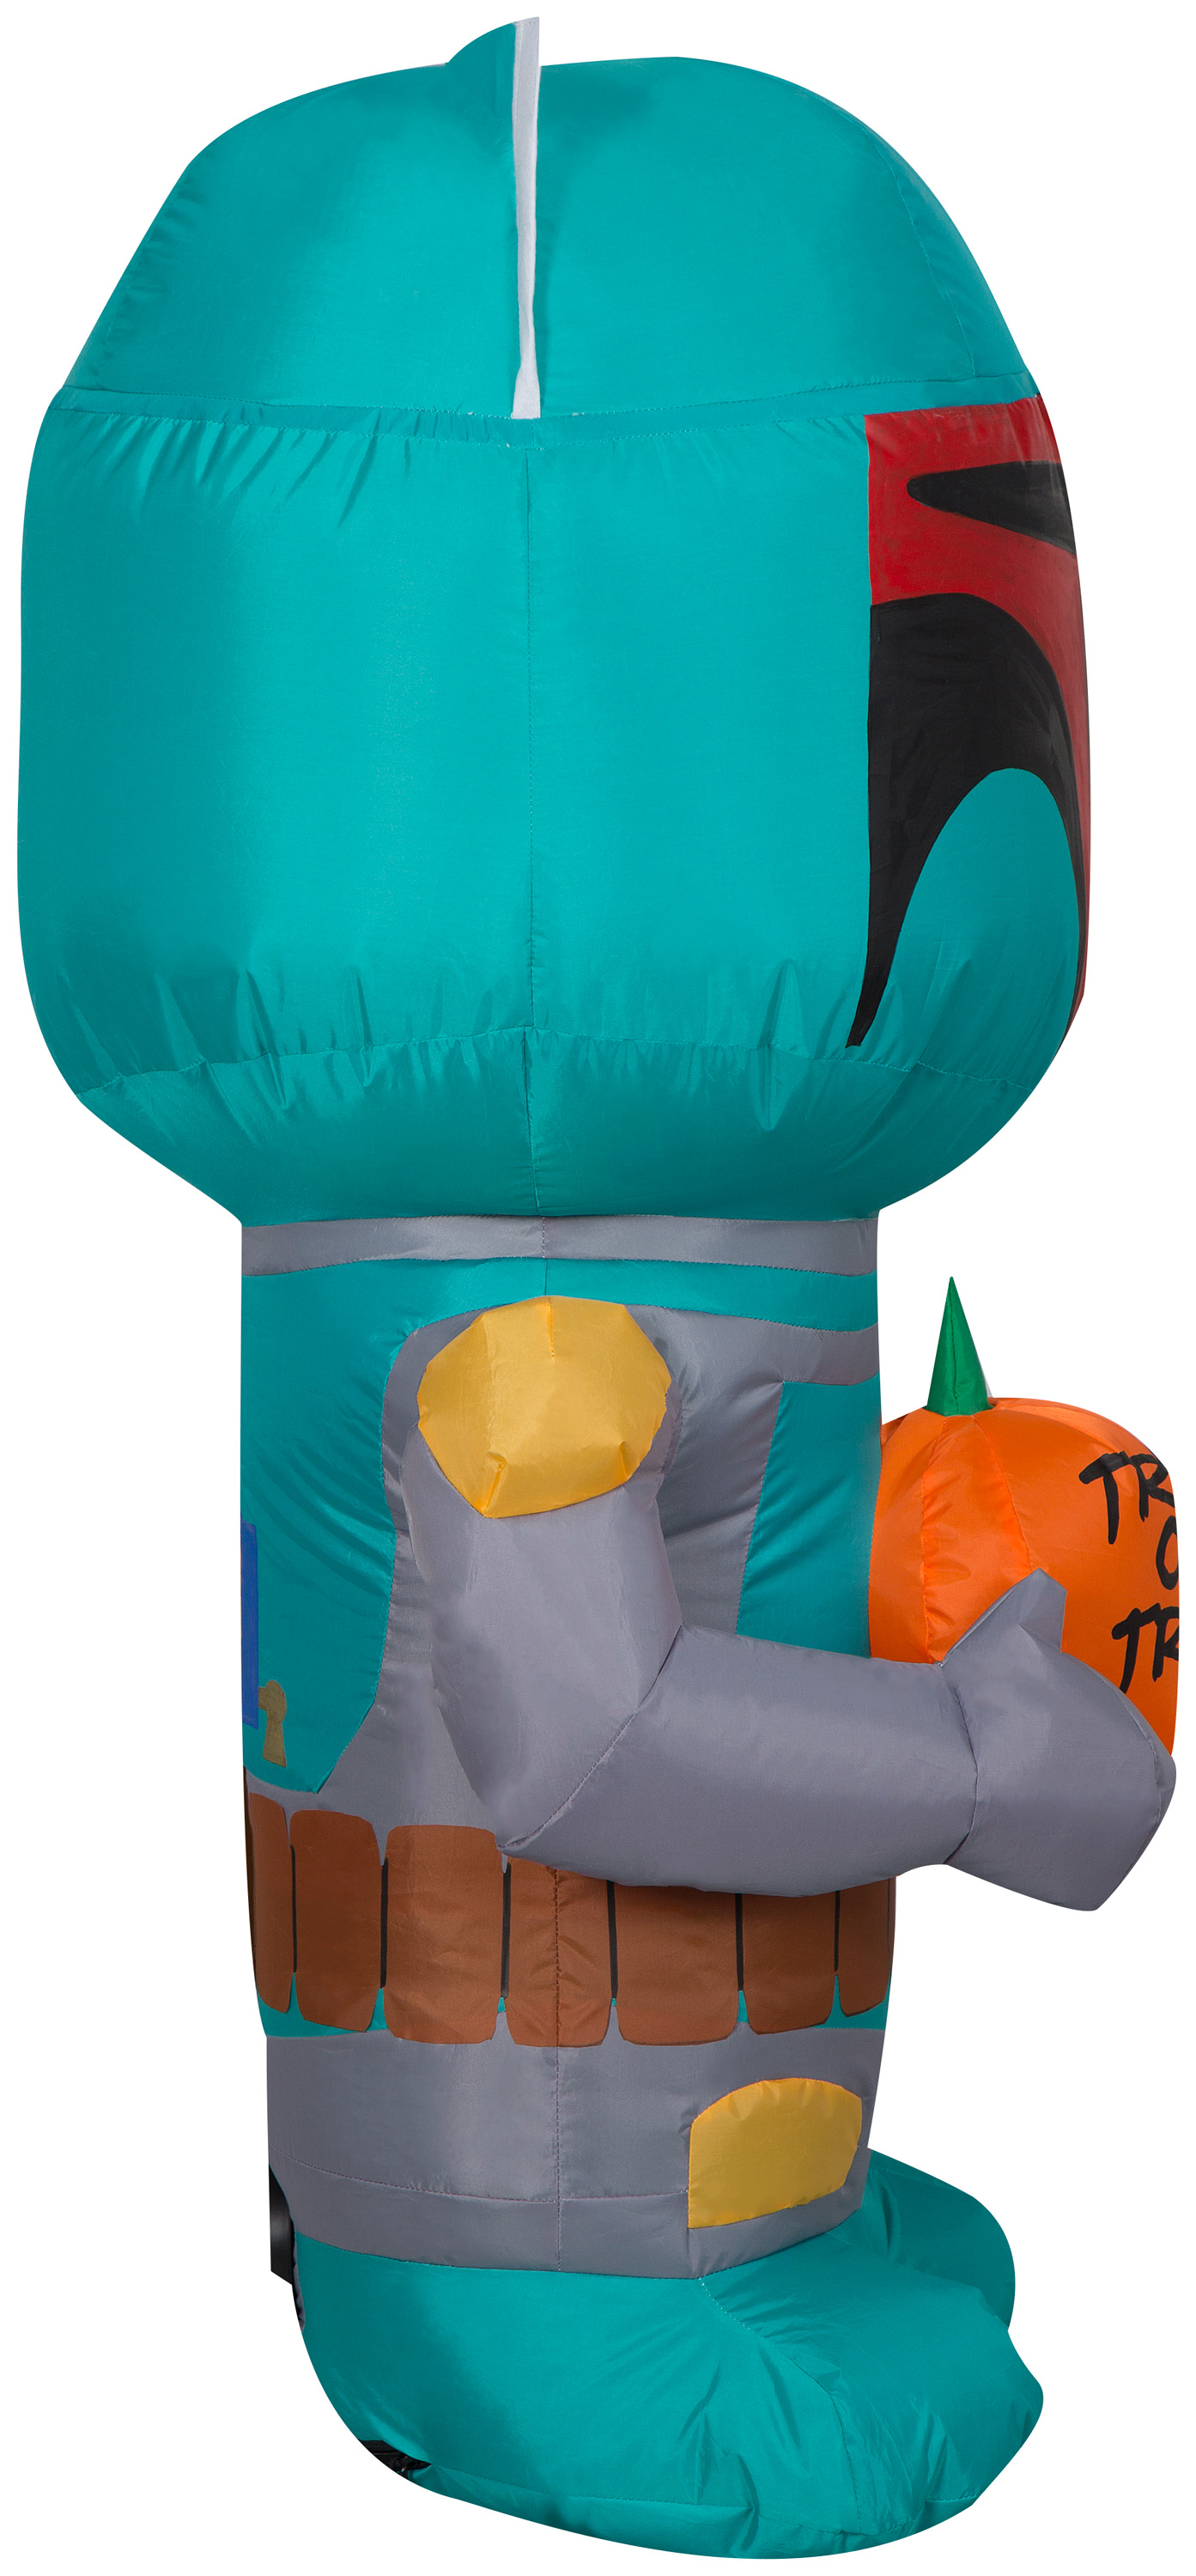 Gemmy Airblown Inflatable Boba Fett with Pumpkin, 3.5 ft Tall, green - image 3 of 4